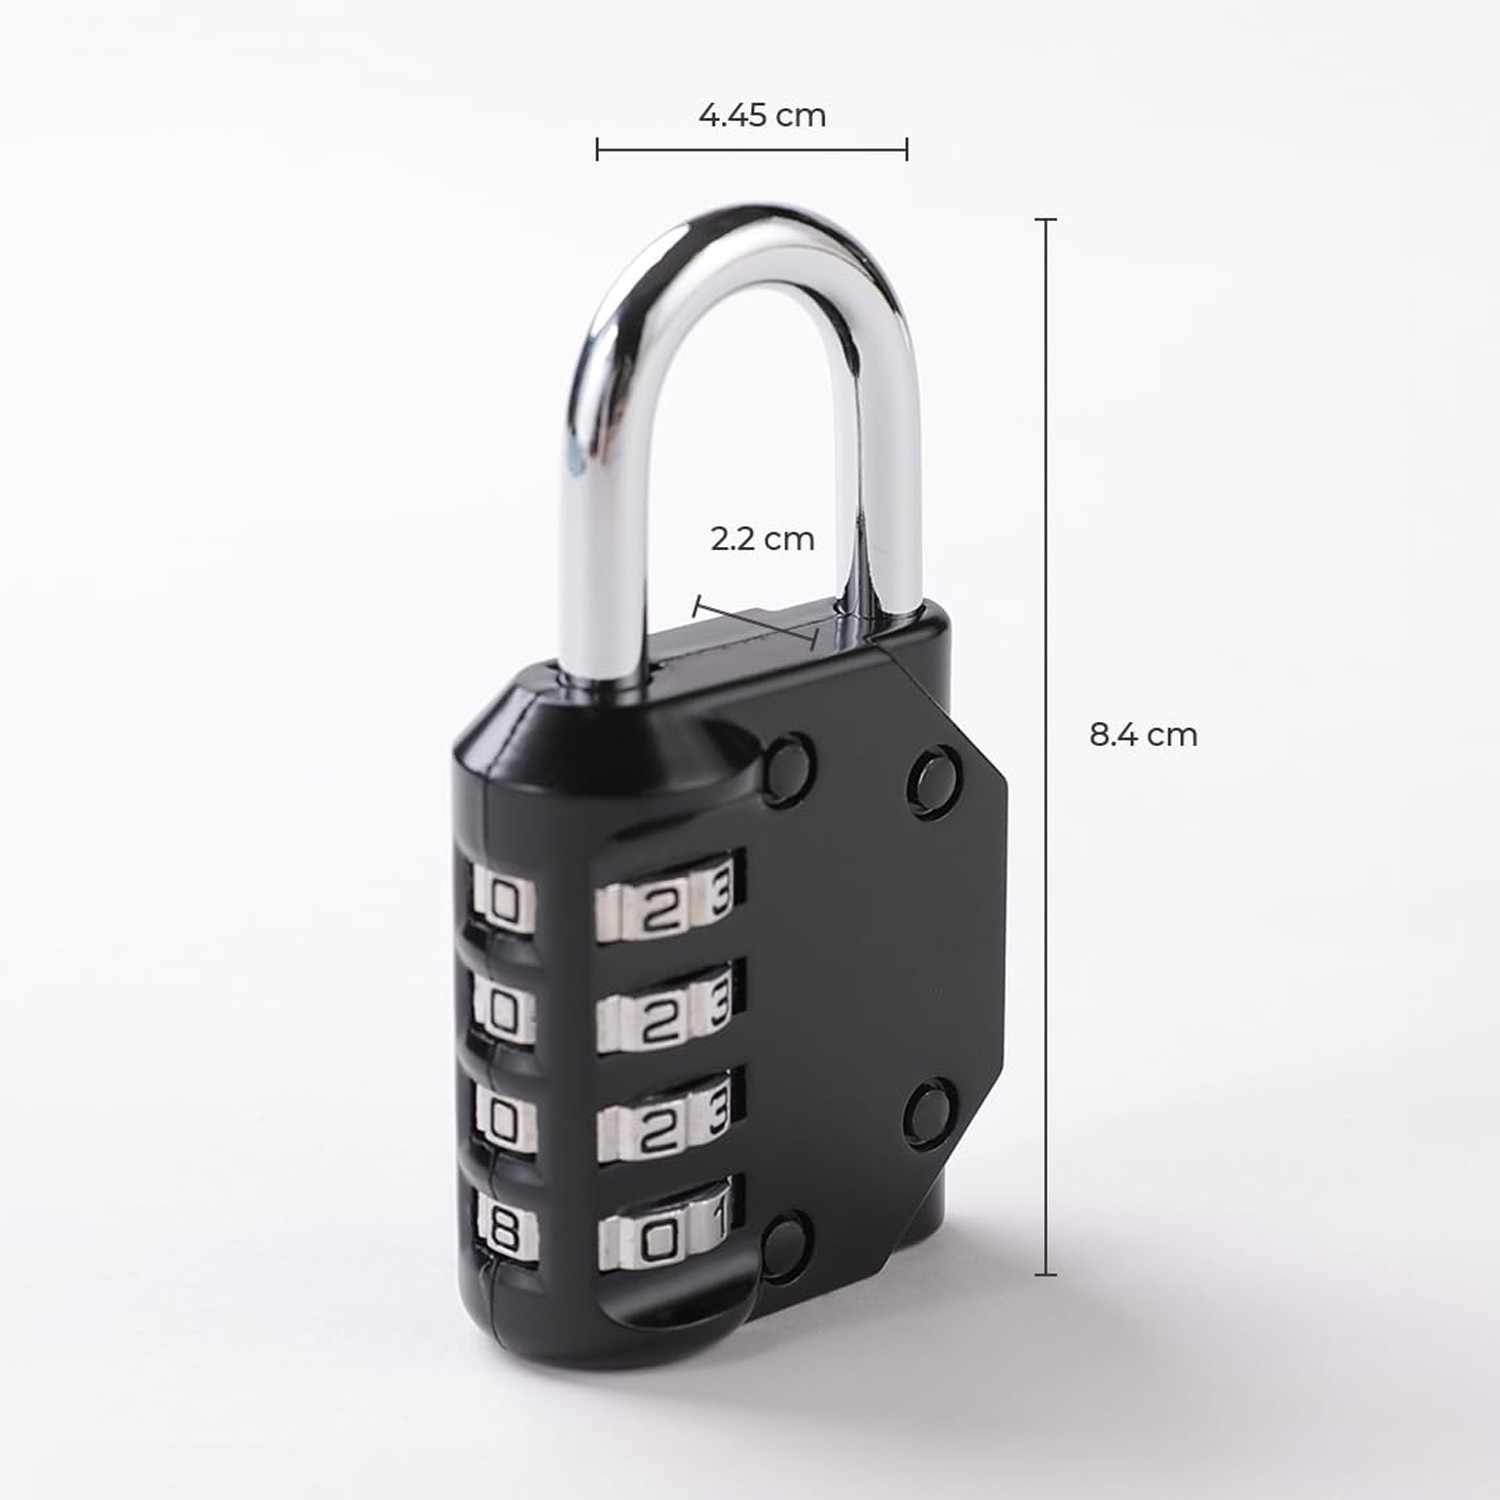 Kuber Industries 4 Digit Combination Lock | Travel Lock for Briefcase | Number Lock | Padlock for Luggage | Travelling Locks for Suitcase | Gym Lock | 8023ABK | Black